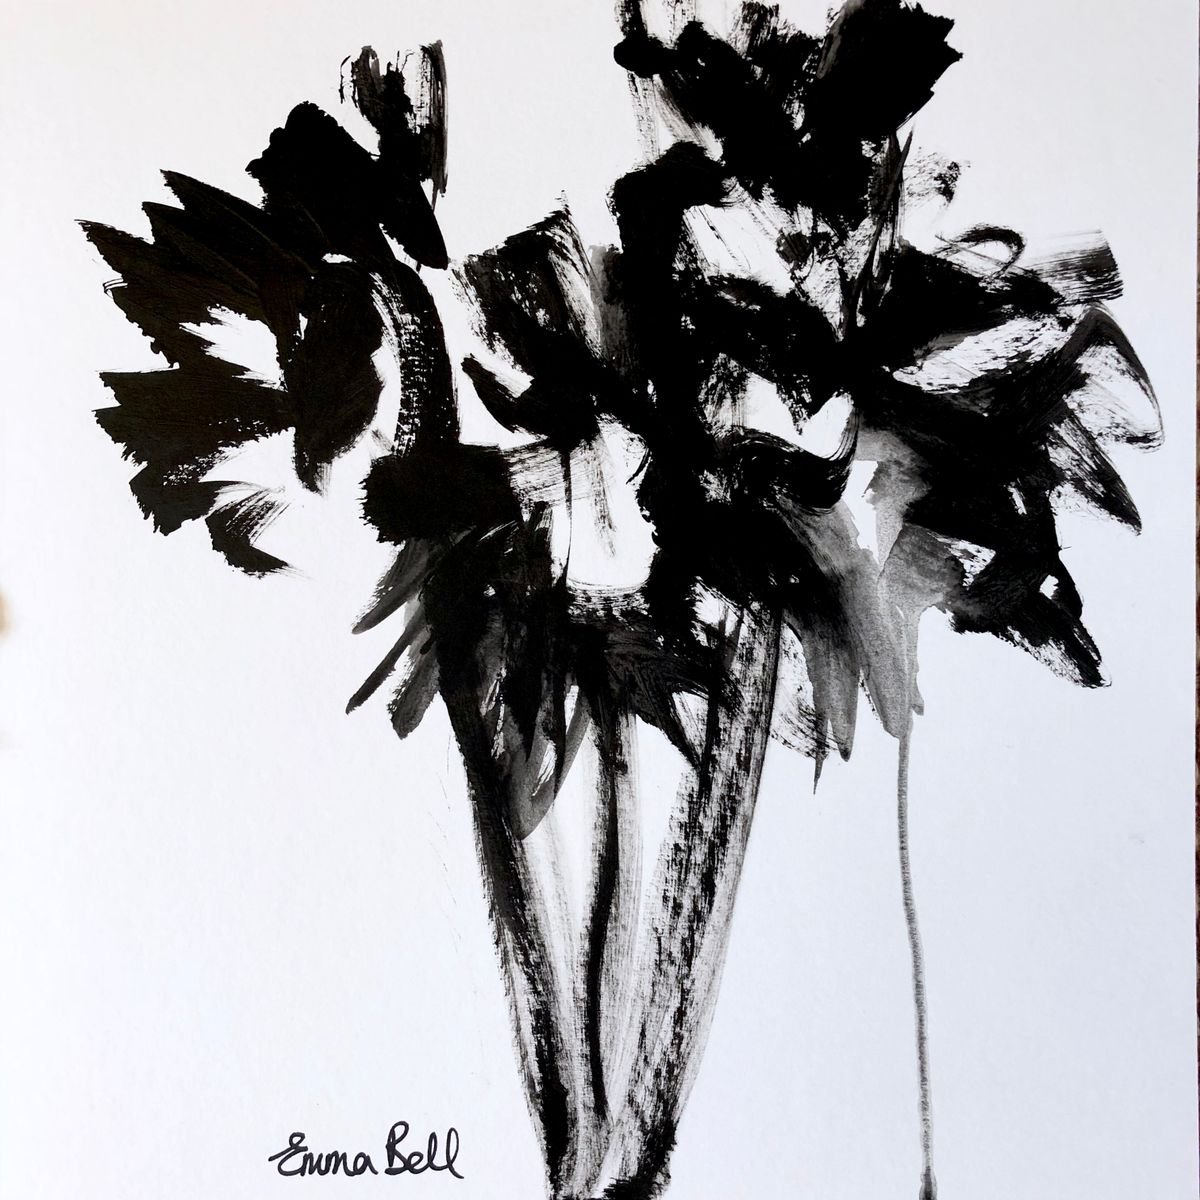 Black Sunflowers acrylic on paper by Emma Bell